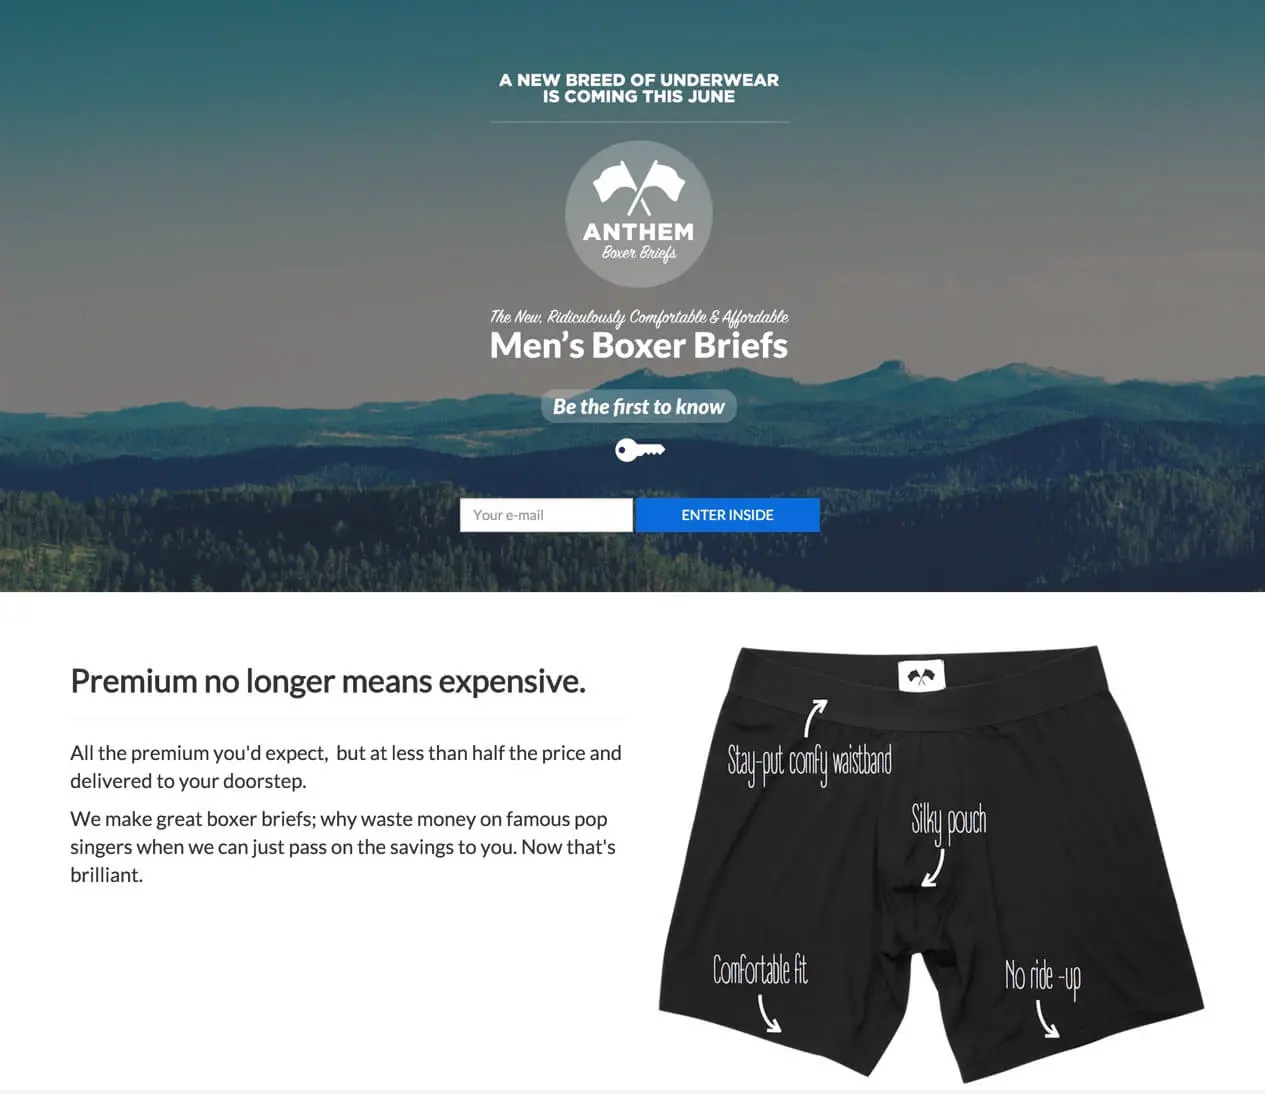 Comfortable Boxers landing page.